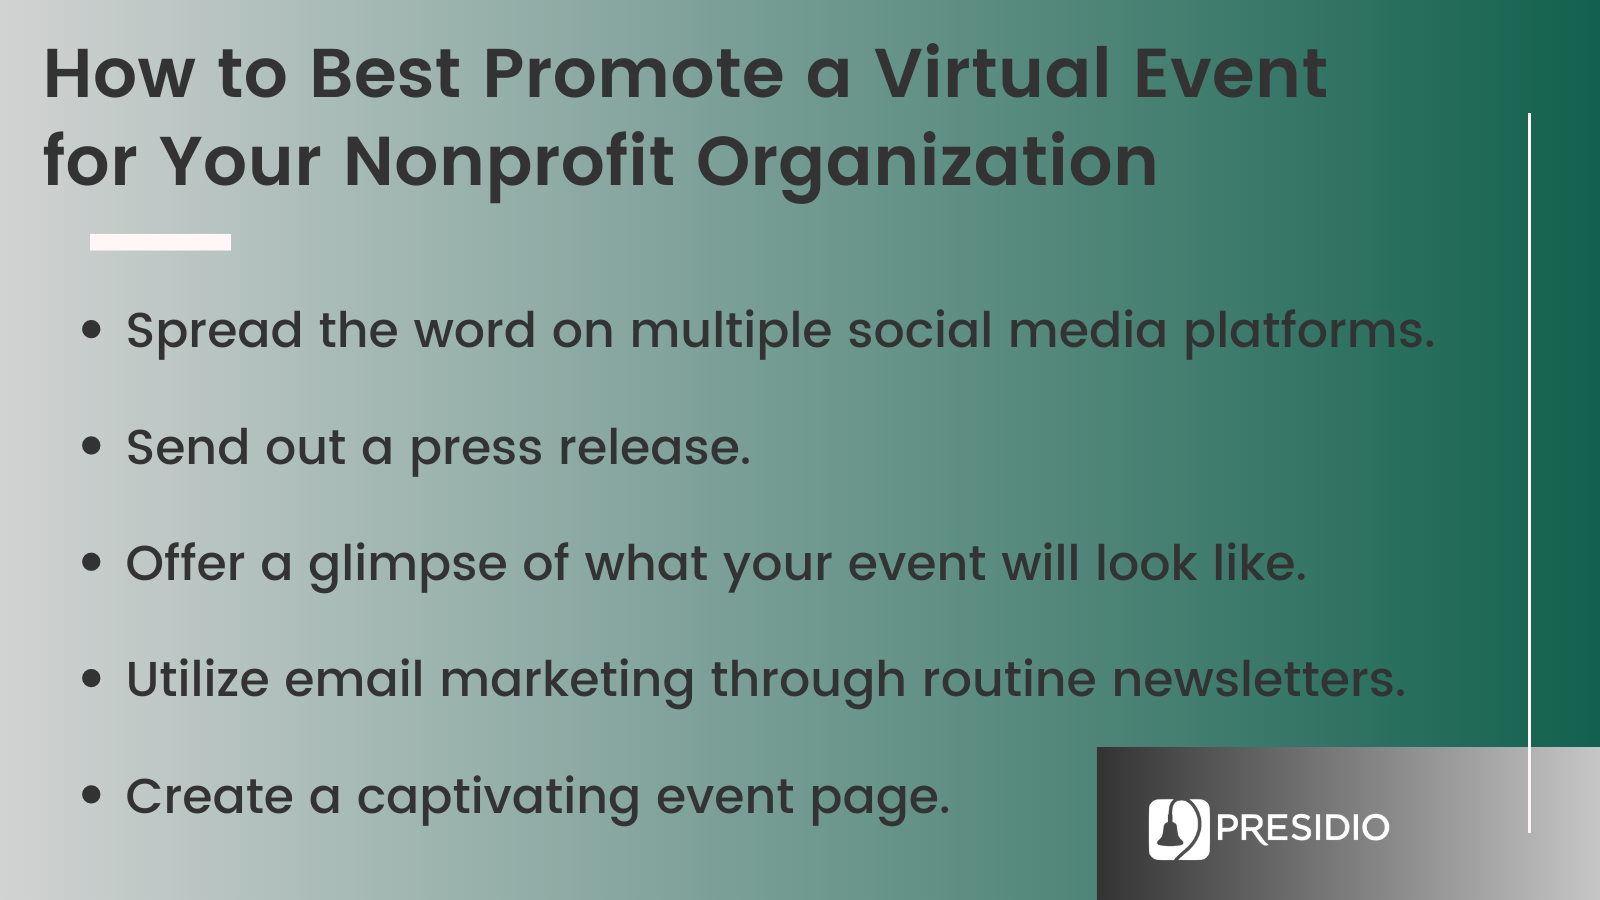 How to Promote a Virtual Event for Your Nonprofit Organization